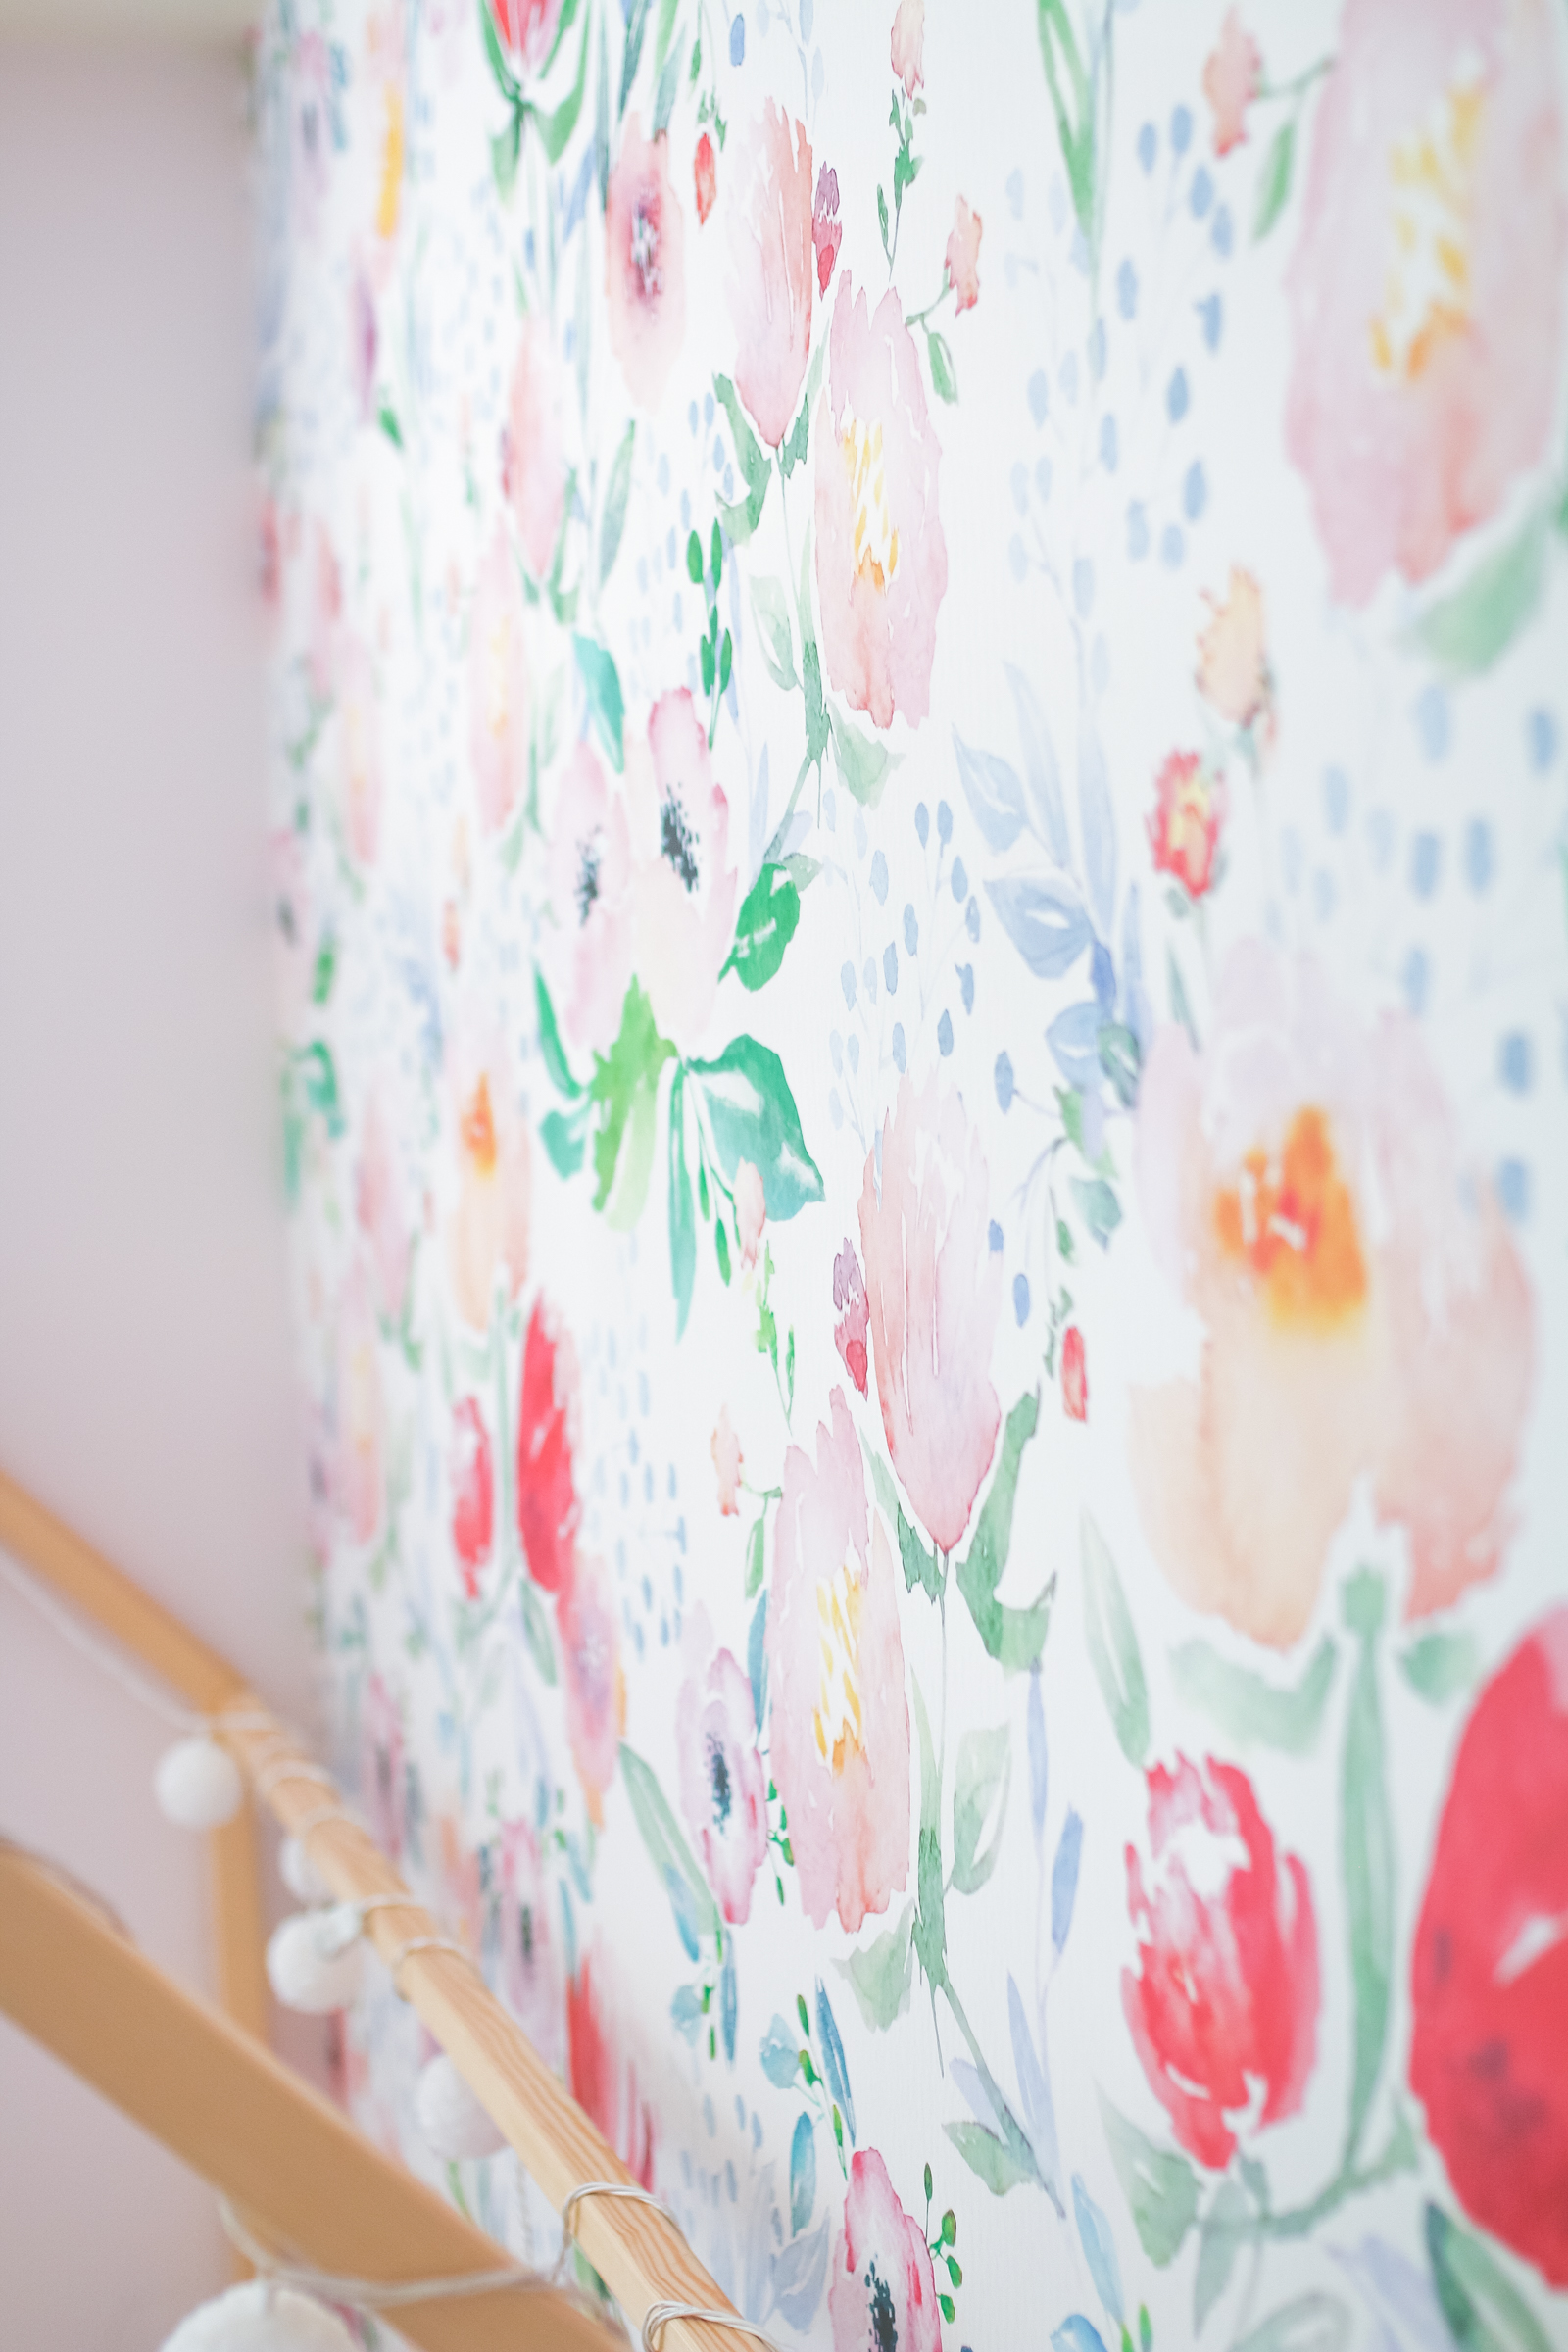 Decorating An Accent Wall With Vinyl Wallpaper by Utah blogger Dandy A La Mode